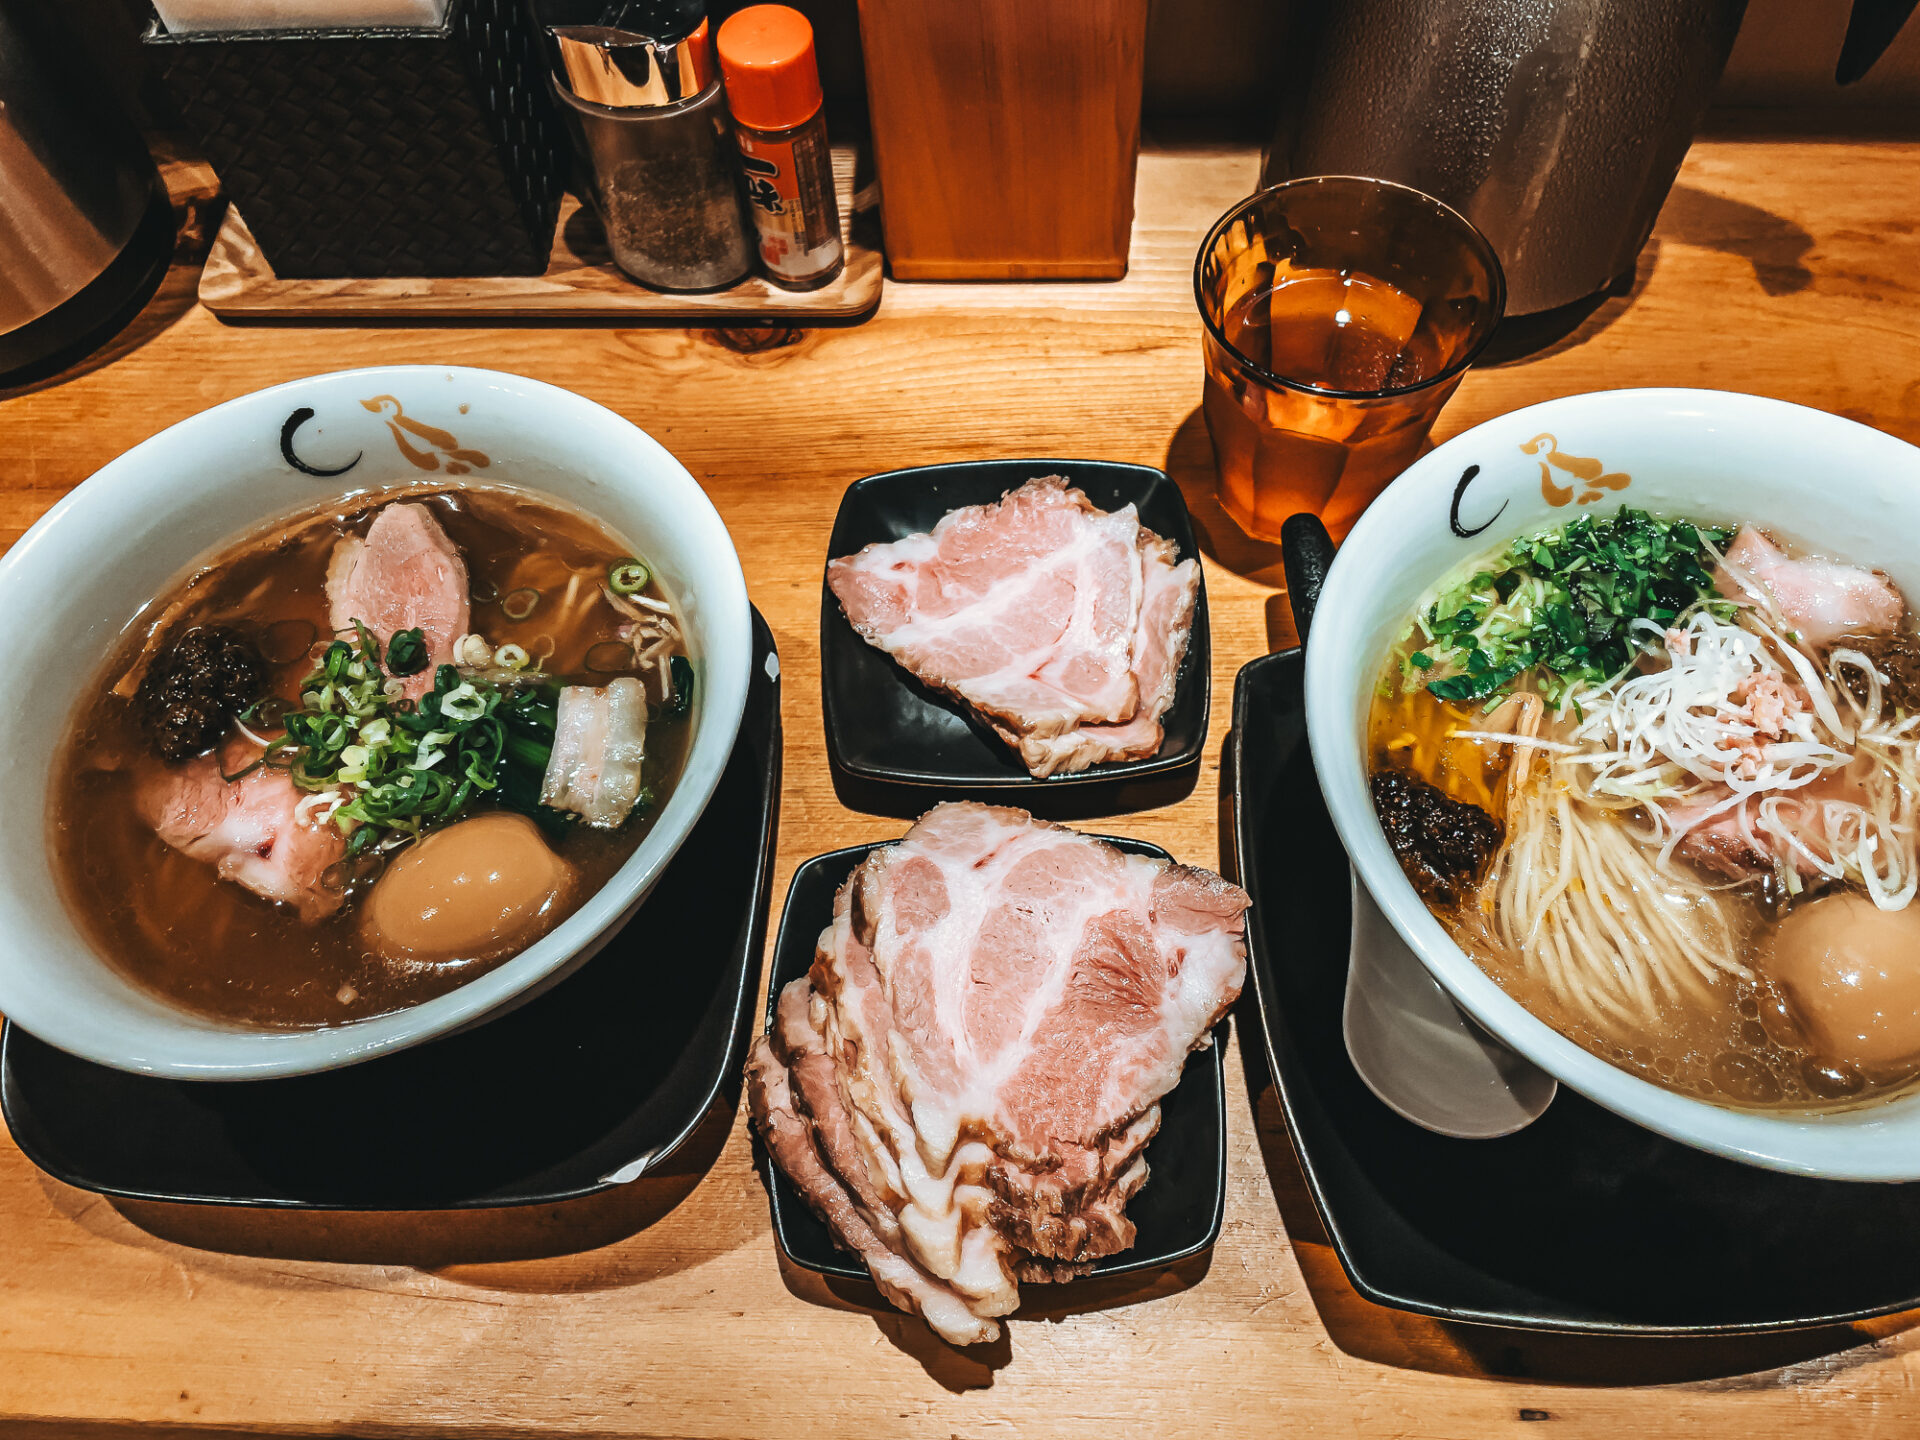 This ramen is a must-try when visiting Tokyo